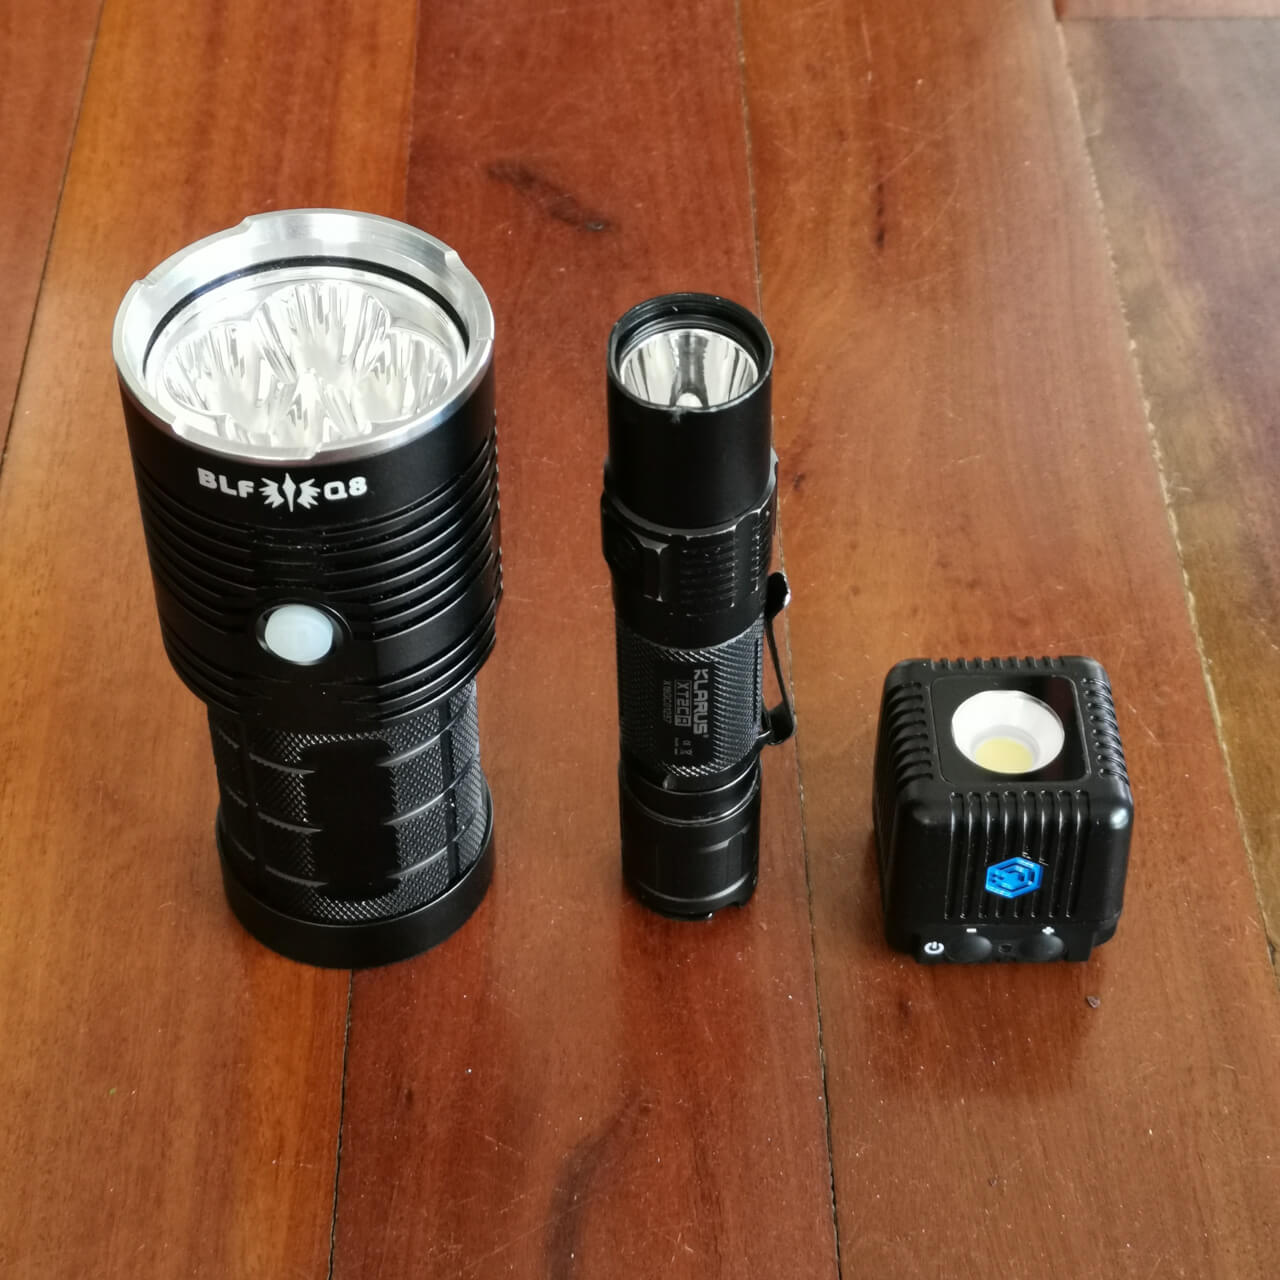 LumeCube 2.0 size compared to a 5,000lm Thorfire Q8 and 1,600lm Klarus XT2CR